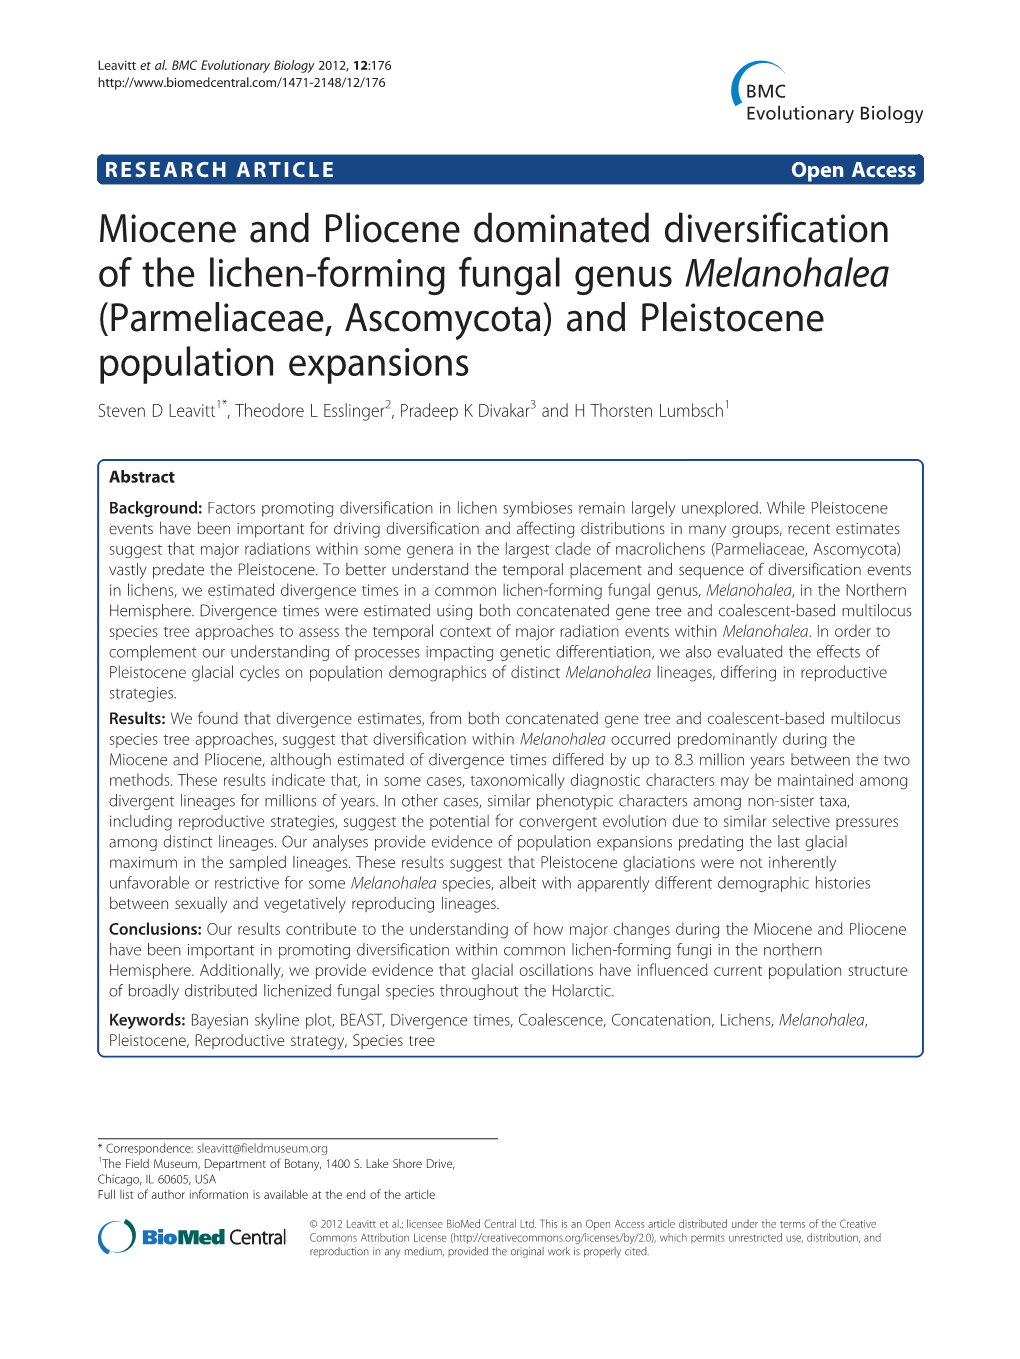 Miocene and Pliocene Dominated Diversification of The